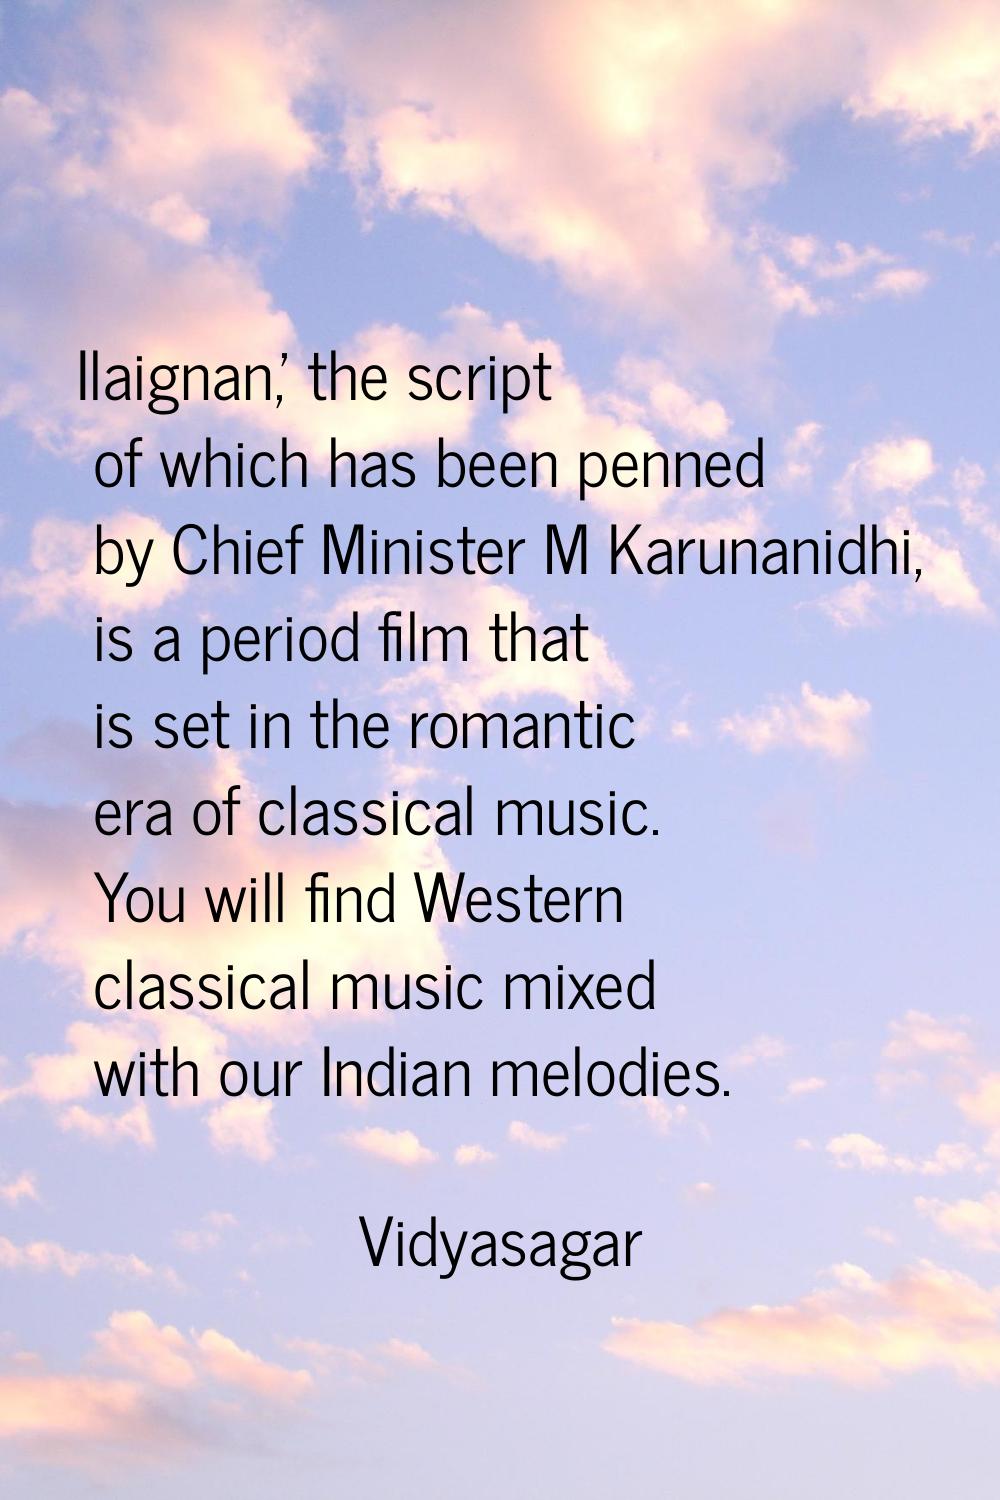 Ilaignan,' the script of which has been penned by Chief Minister M Karunanidhi, is a period film th